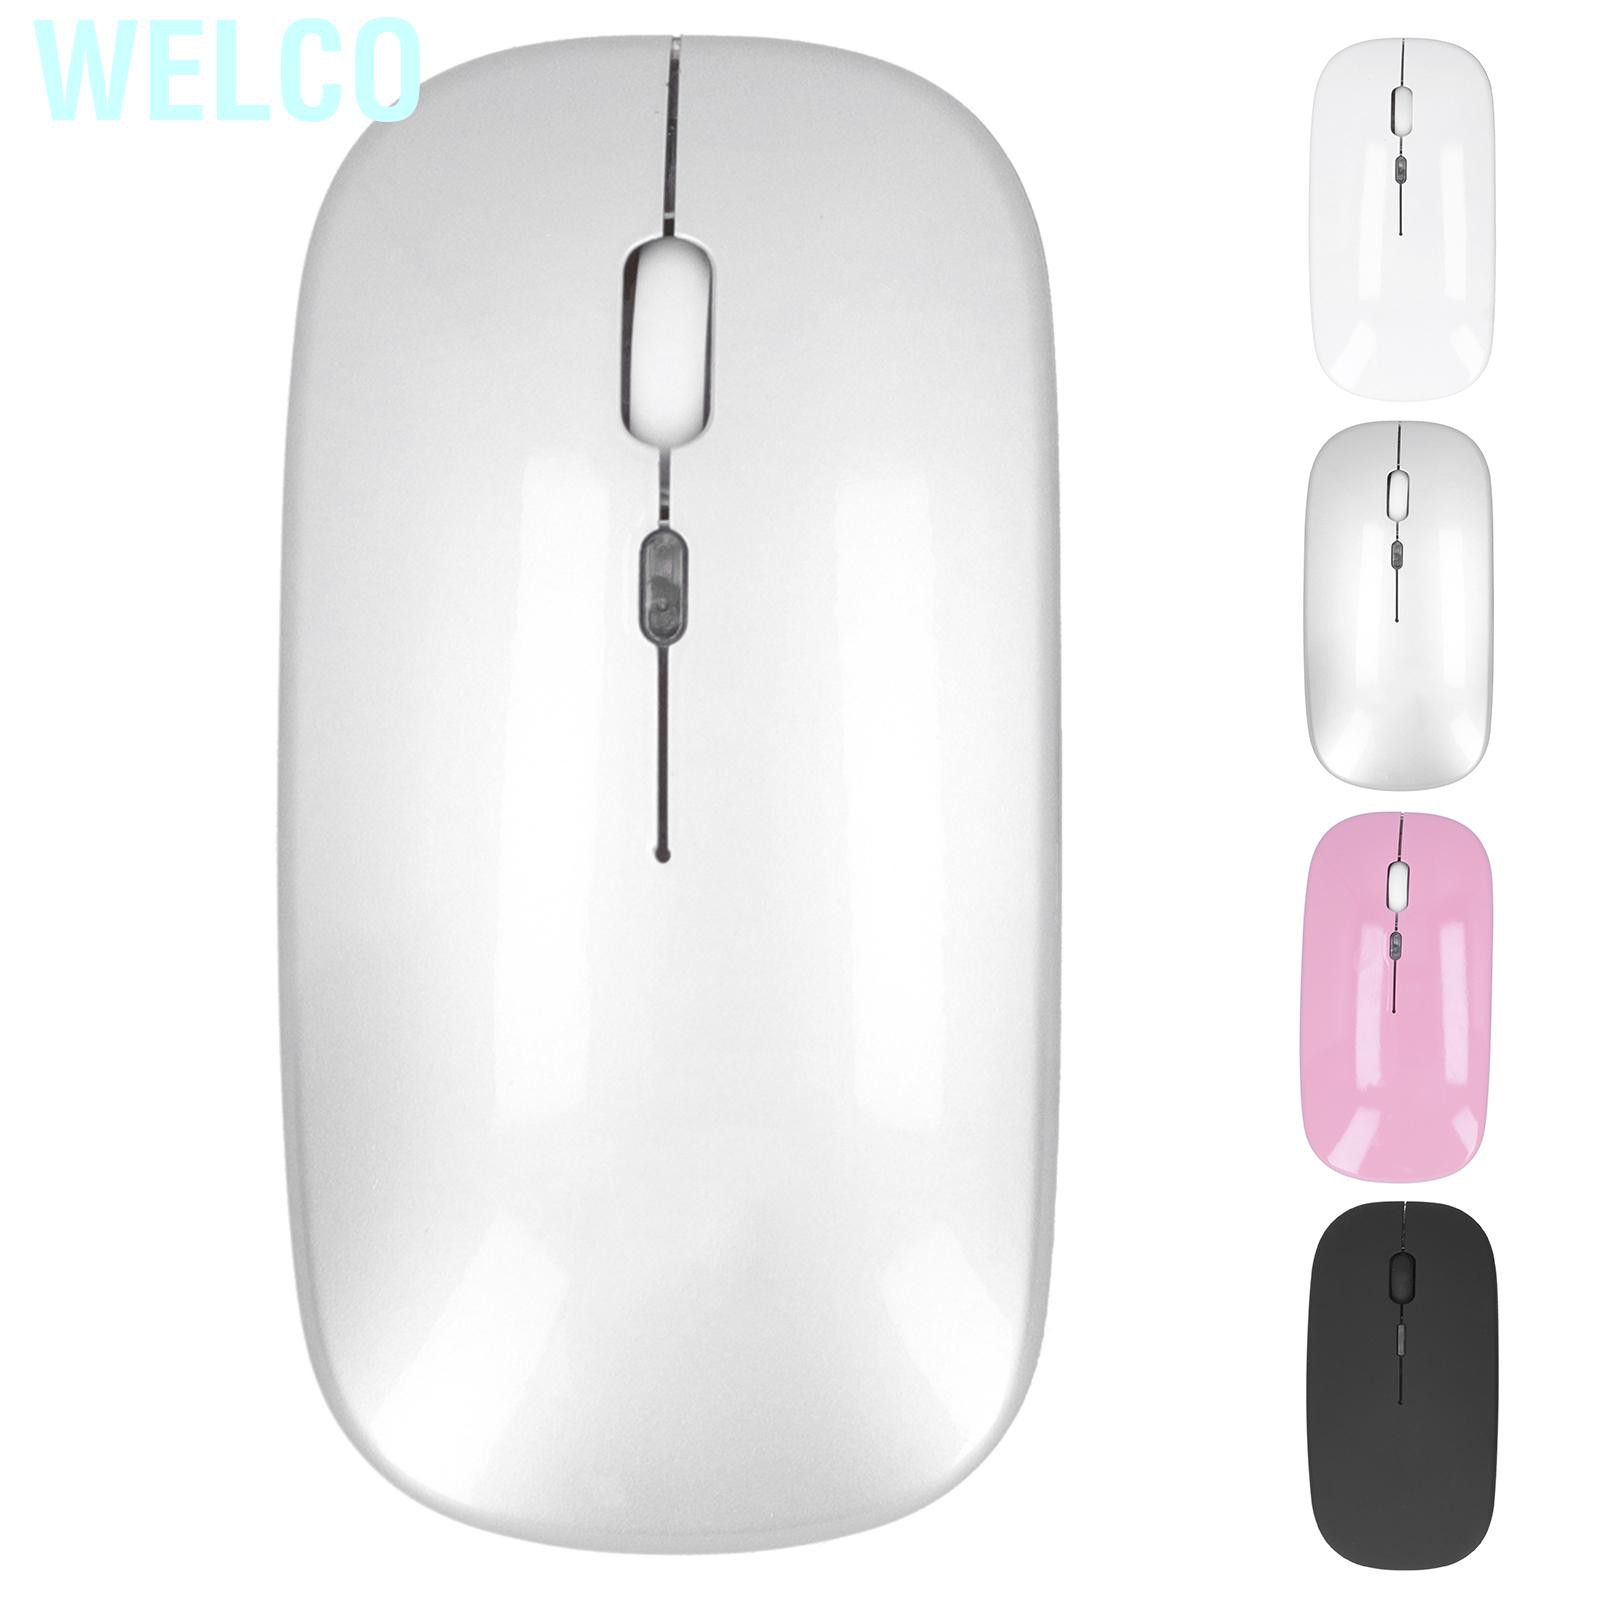 Welco 2.4Ghz Wireless Mouse Rechargeable Light Ergonomic Mice 1600DPI No Noise with Smart Optical Sensor